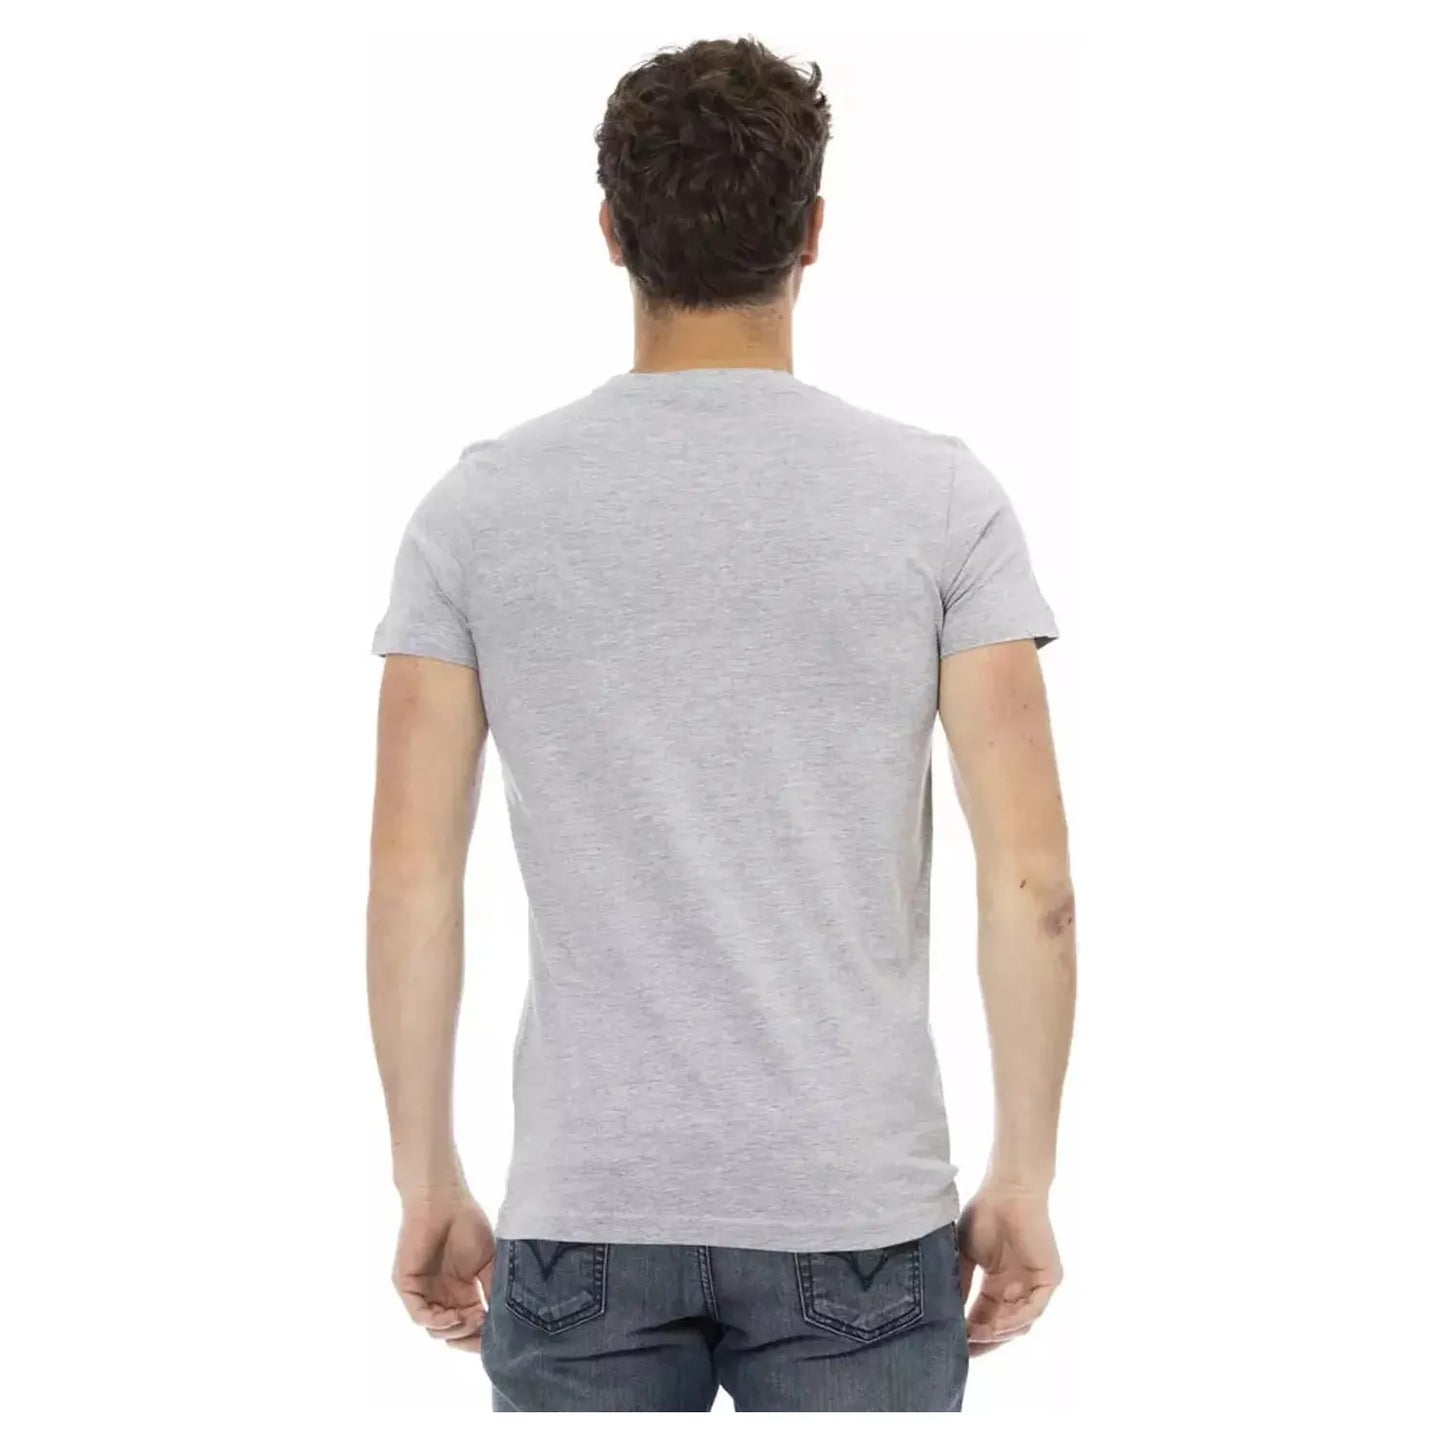 Trussardi Action Chic Graphite Short Sleeve Tee with Front Print gray-cotton-t-shirt-90